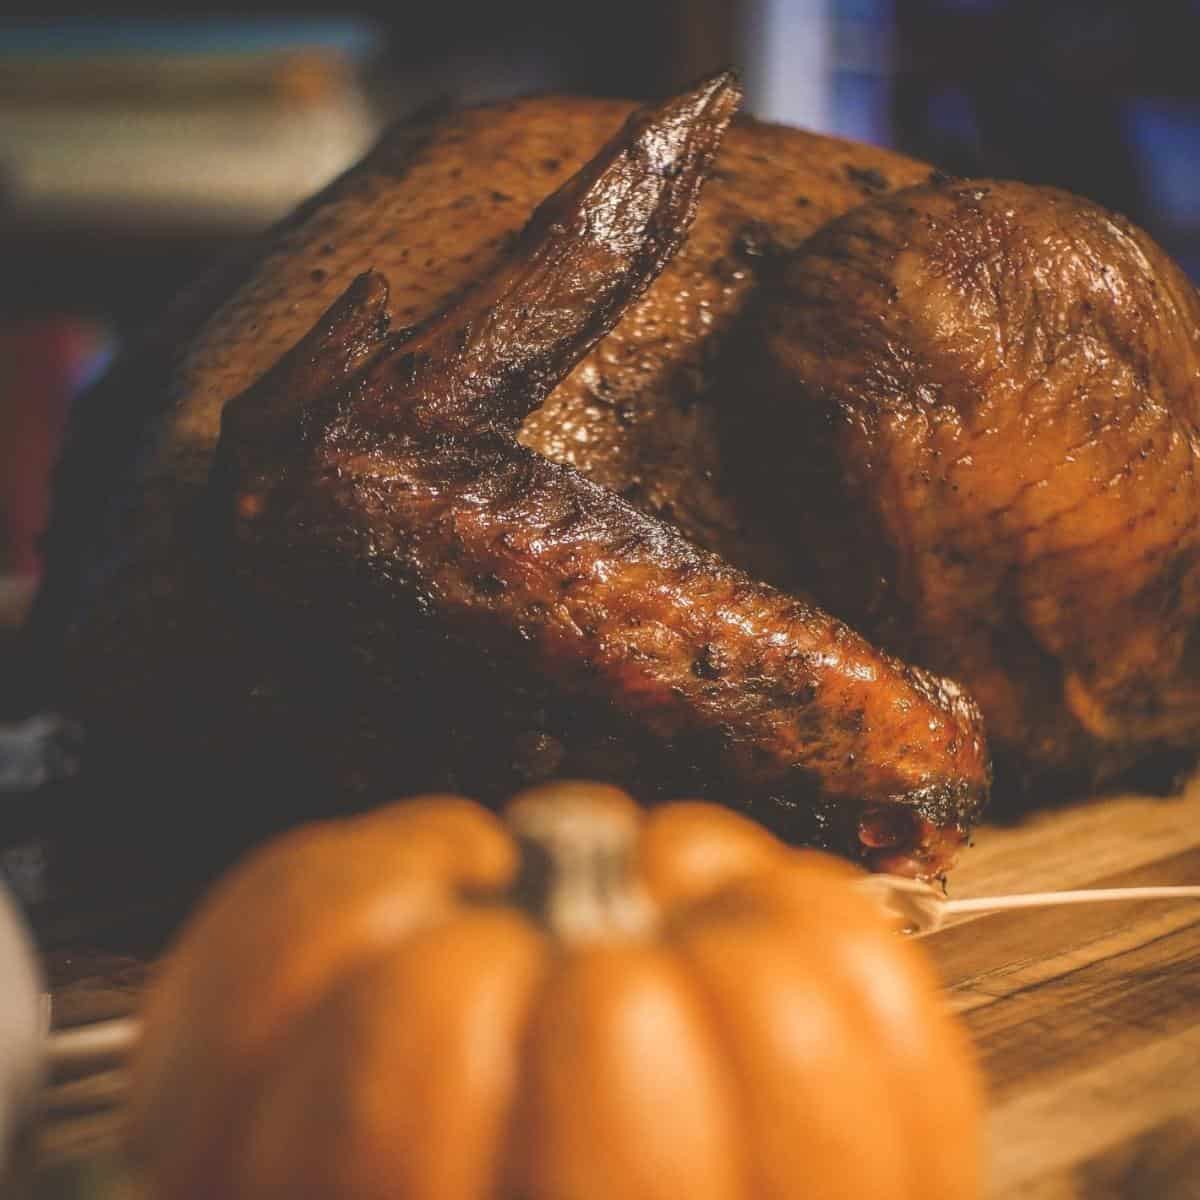 a browned and perfectly smoked whole turkey on a wooden board. In front is an out of focus pumpkin.